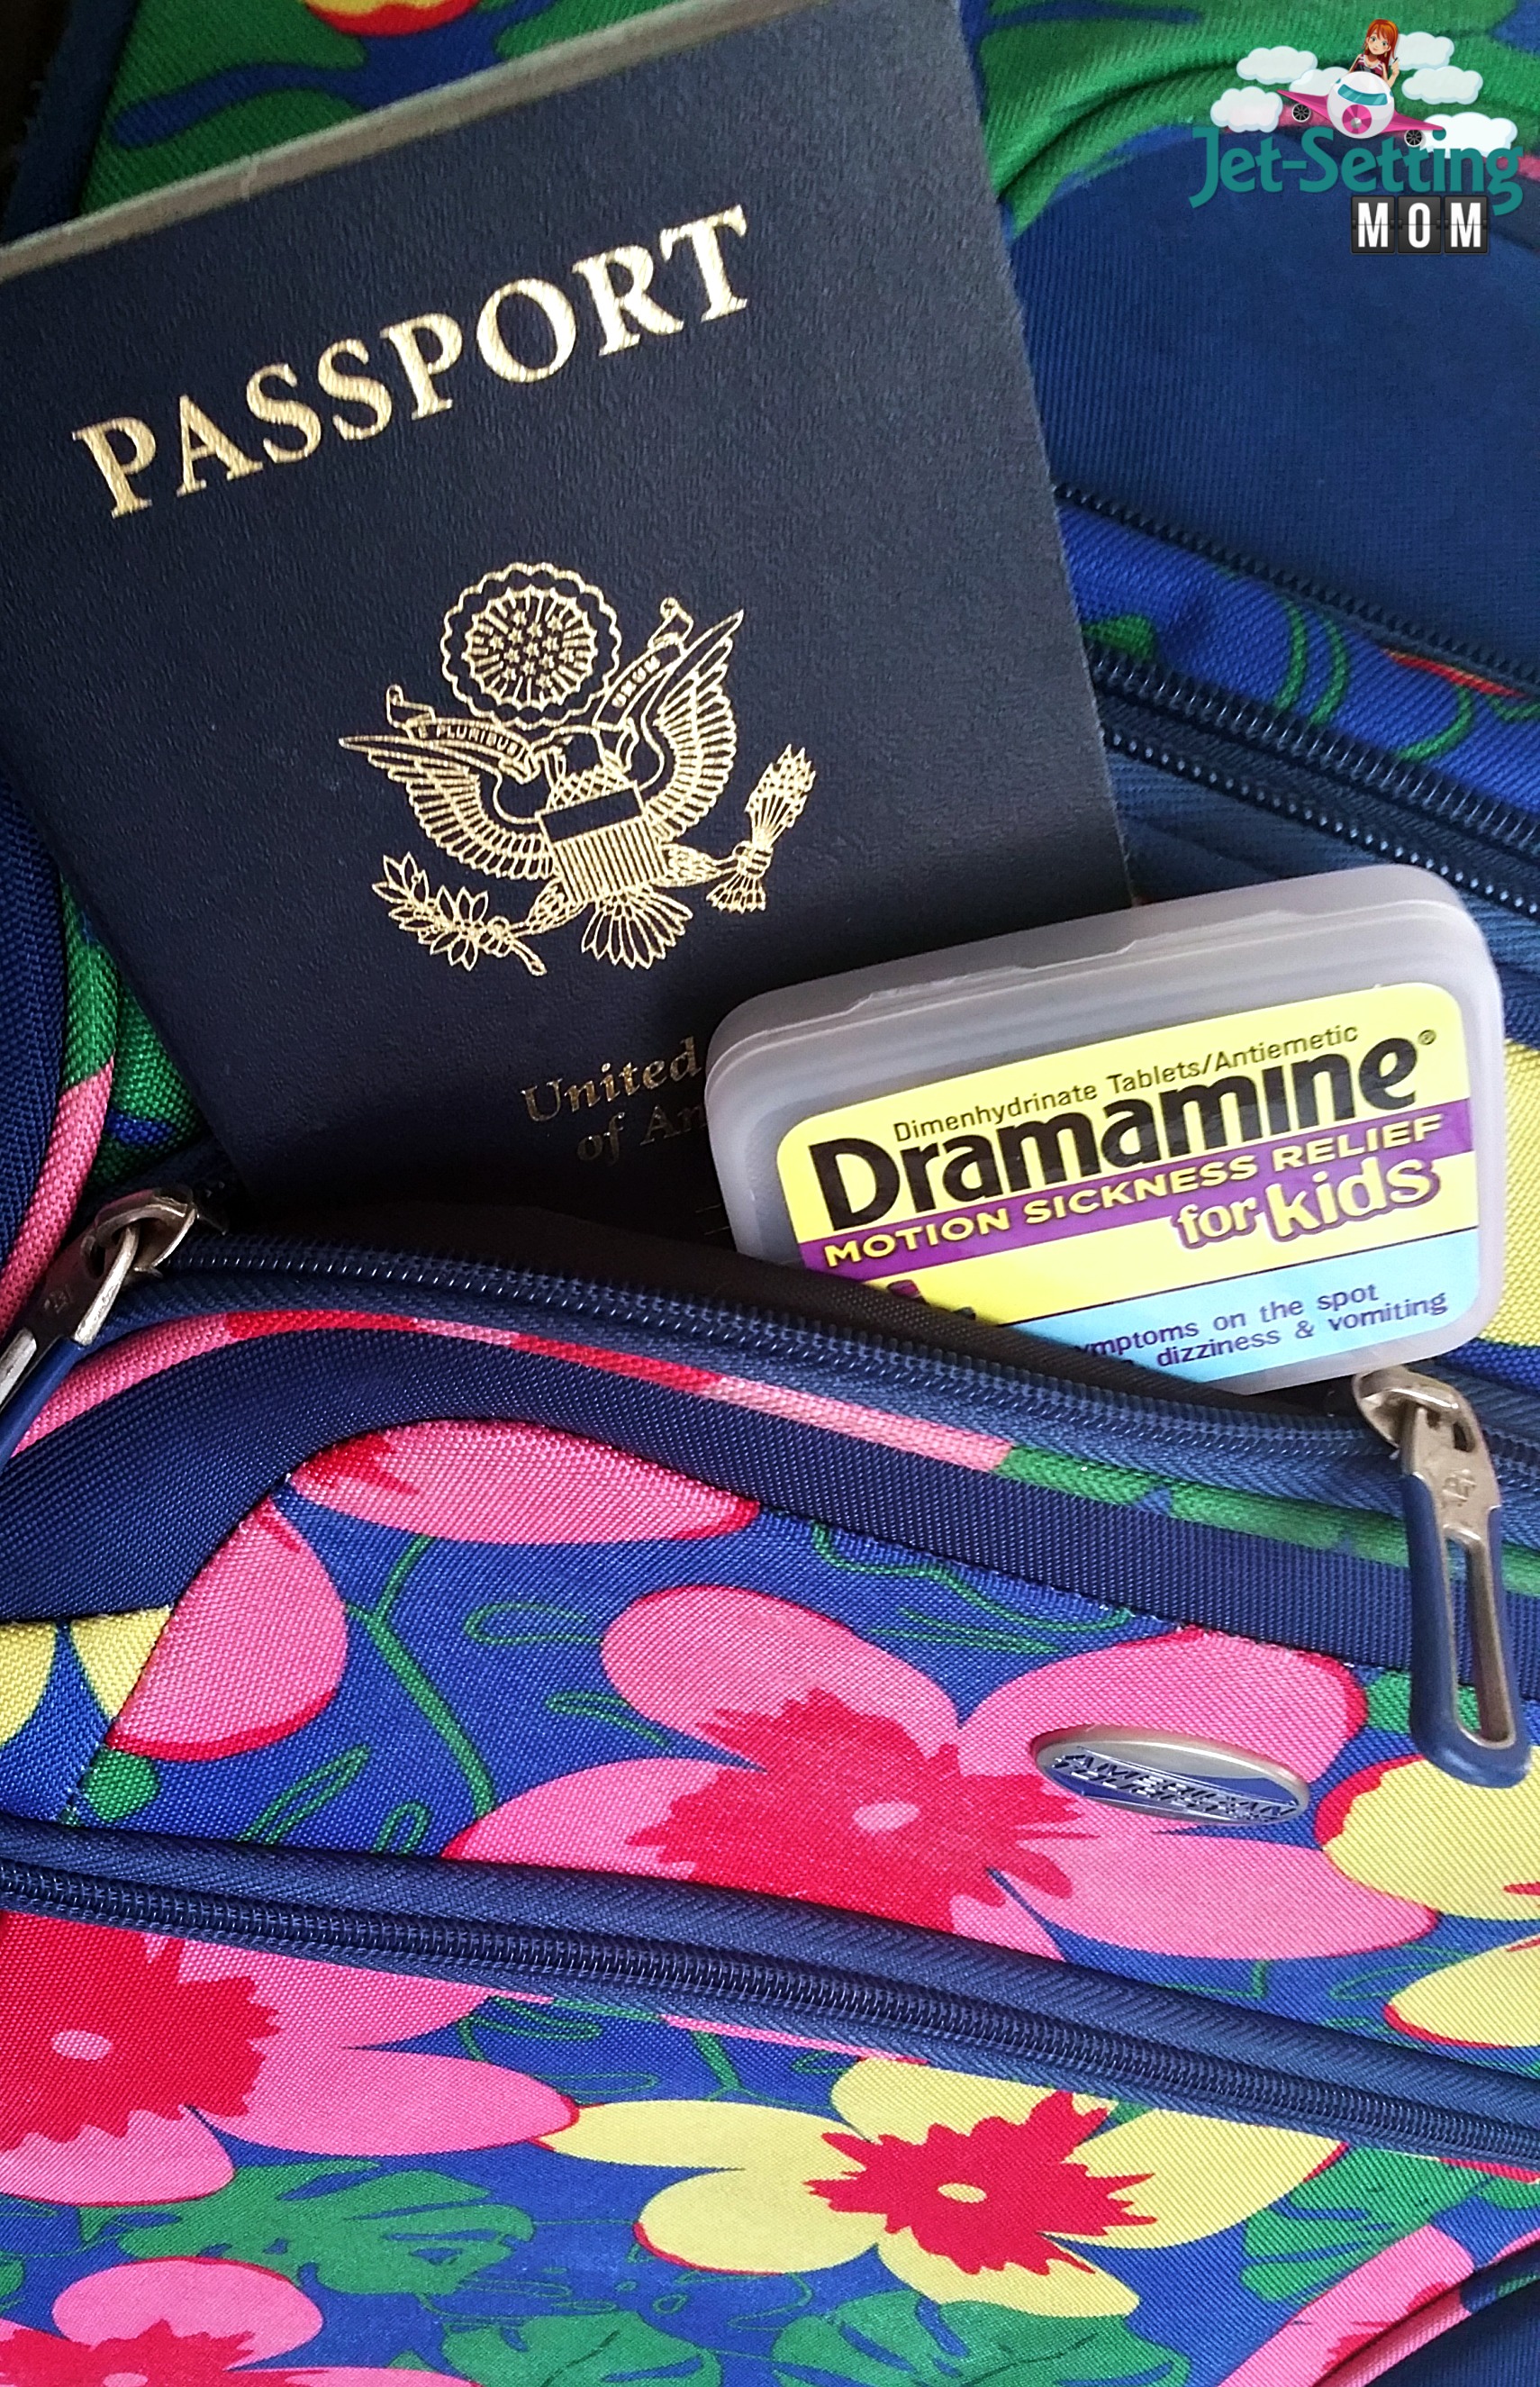 Dramamine® for Kids is a great way to keep travels fun. #AdventuresInMotion #ad #IC #travel #kids